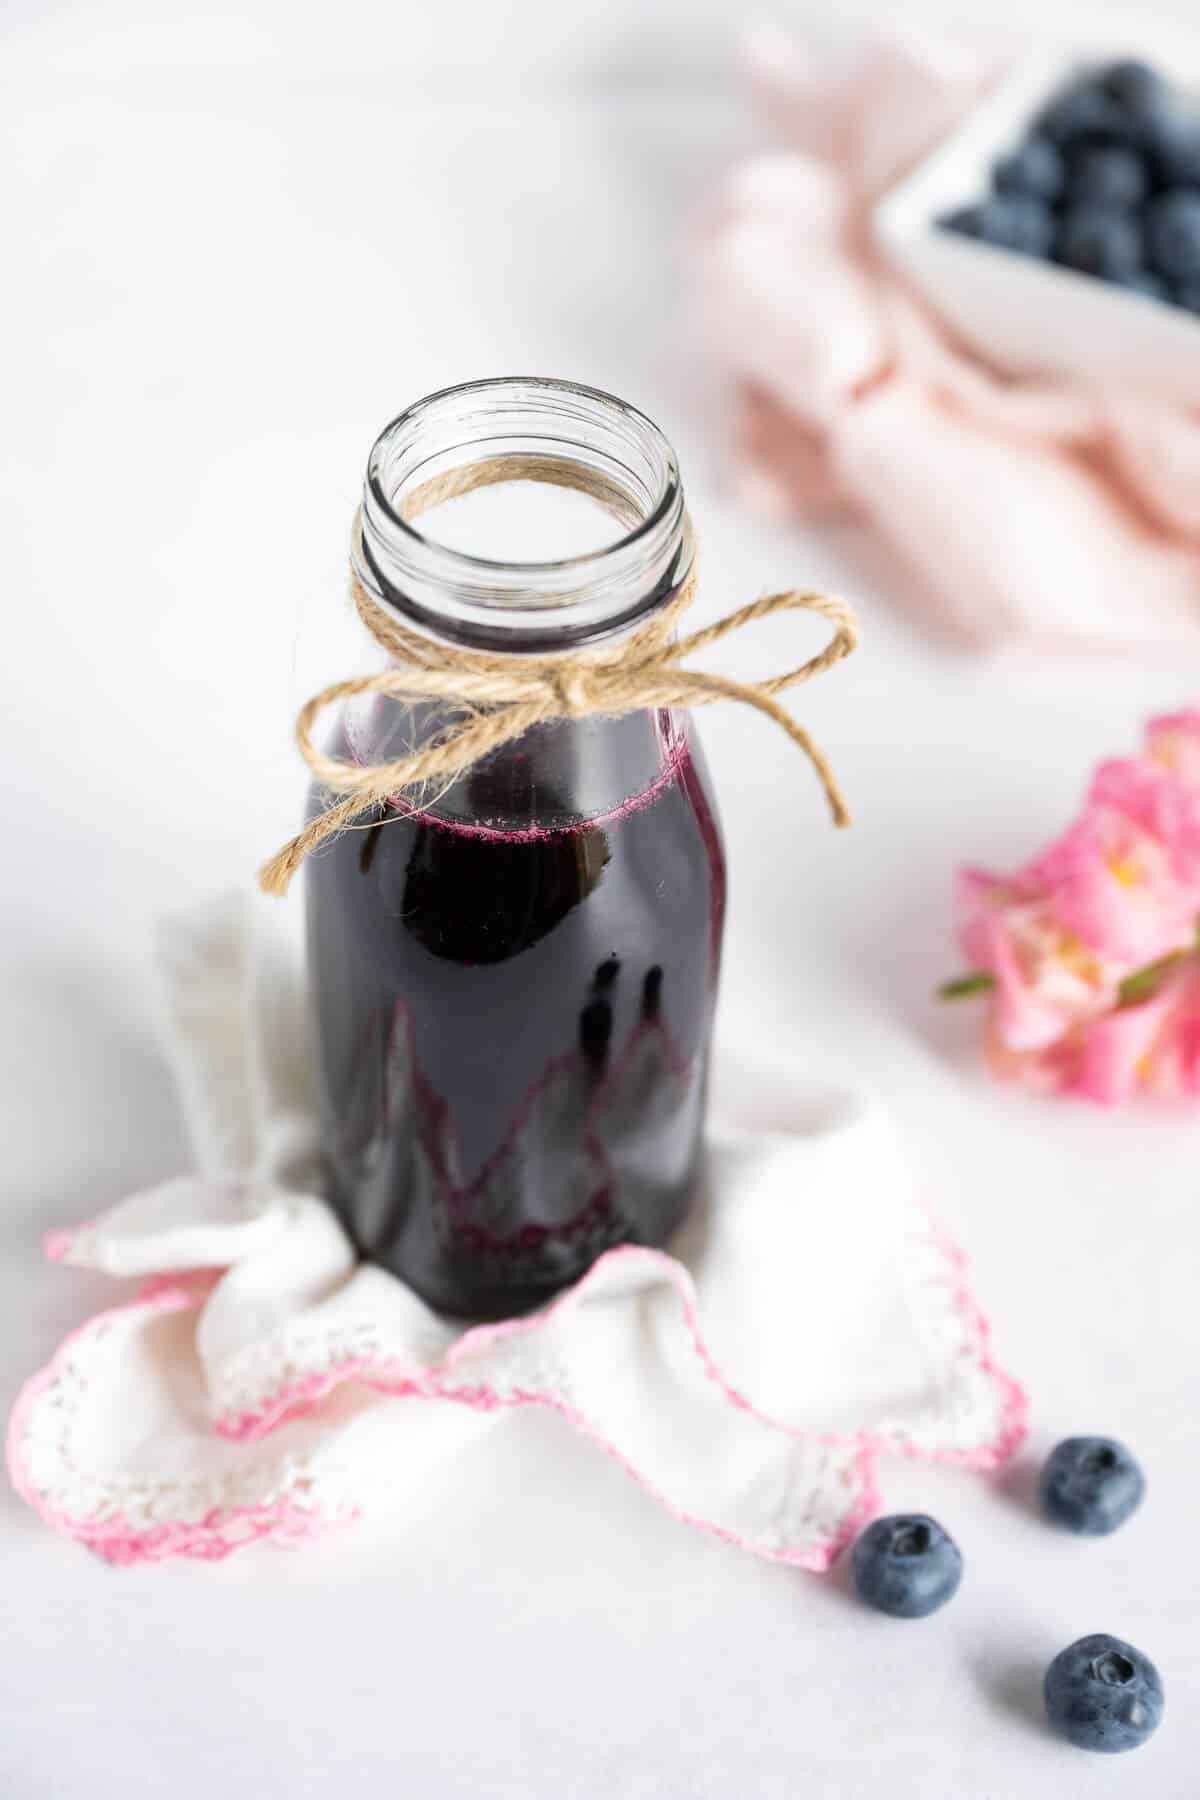 Homemade blueberry simple syrup in a milk-bottle type glass jar. A few blueberries off to the side and a bowl of fresh blueberries in the background.